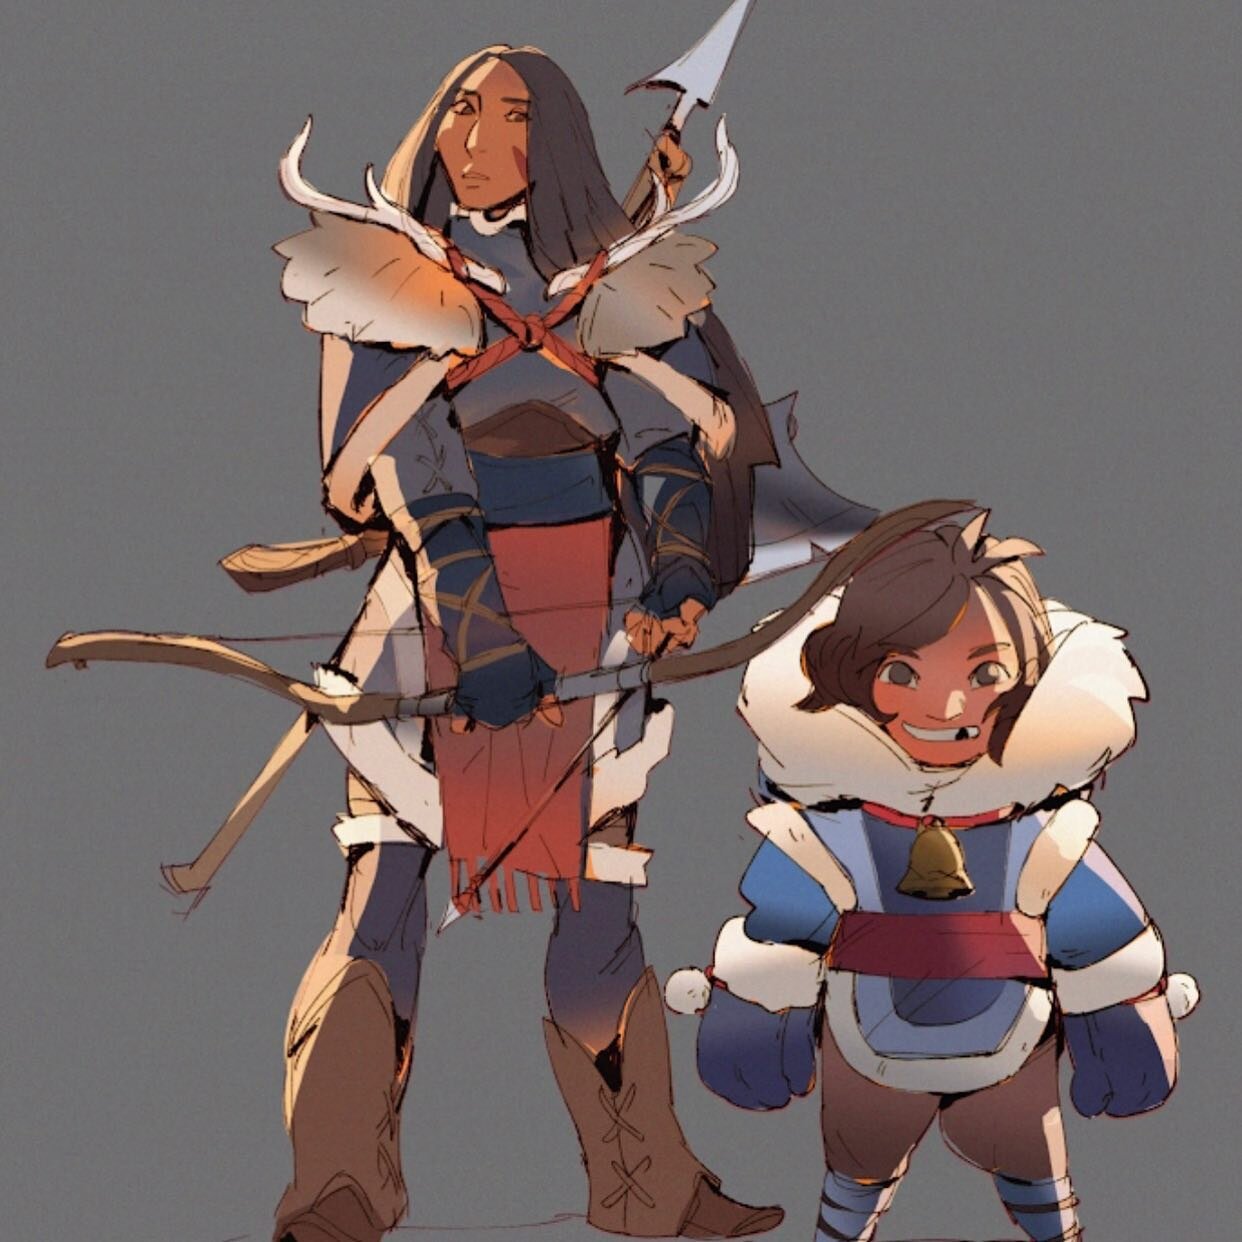 A huge thanks to Emily Mai @_maiem for doing our character explorations! Stay tuned for more work!

#sva #computerart #svacomputerart #svathesis #cg #characterdesign #conceptart #illustration